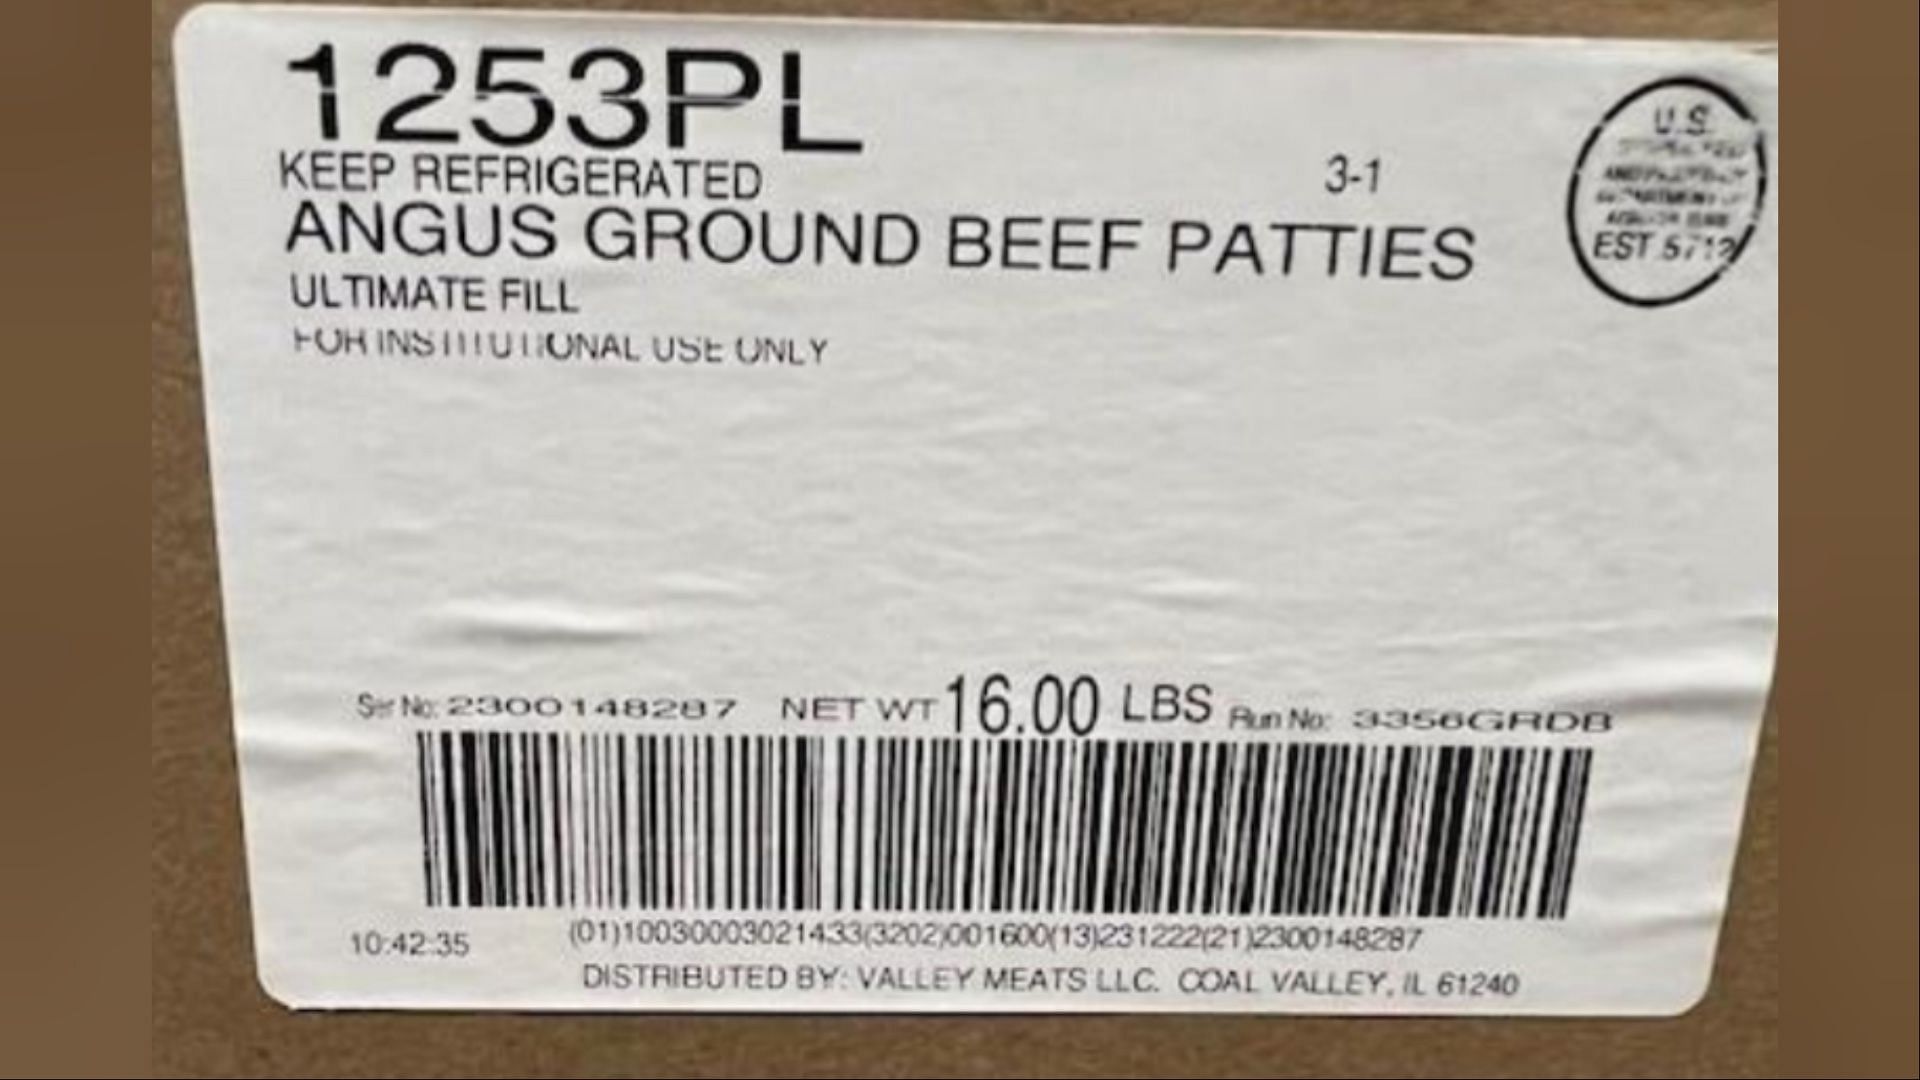 The affected ground beef patty products may be contaminated with E. coli O157:H7 (Image via FSIS)